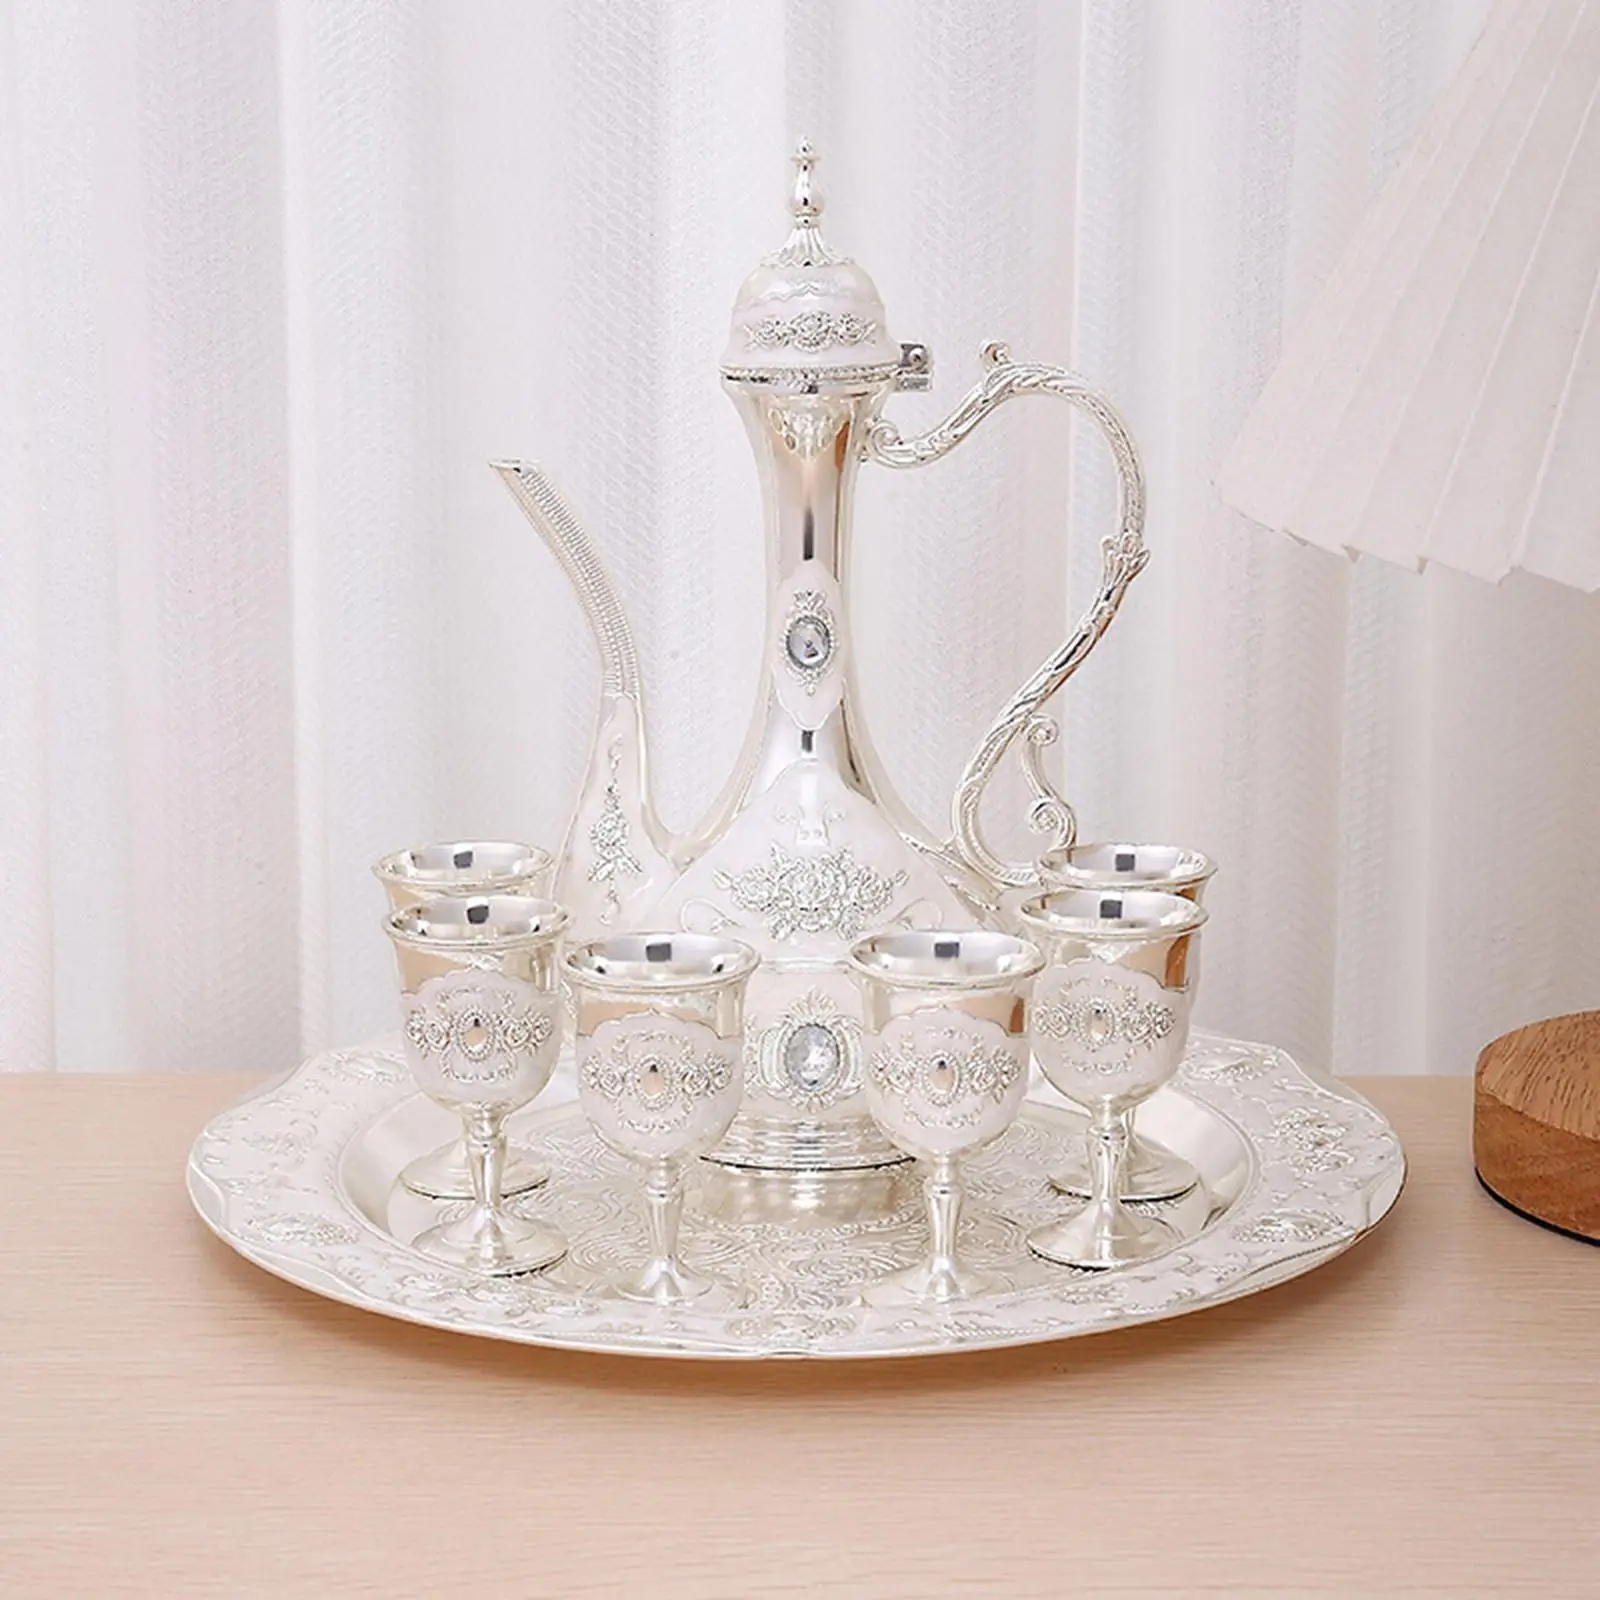 Turkish Teapot Set and Tray Crafts 6 Metal Cups for Tea Table Home Bar Wedding Gift Birthday Gift